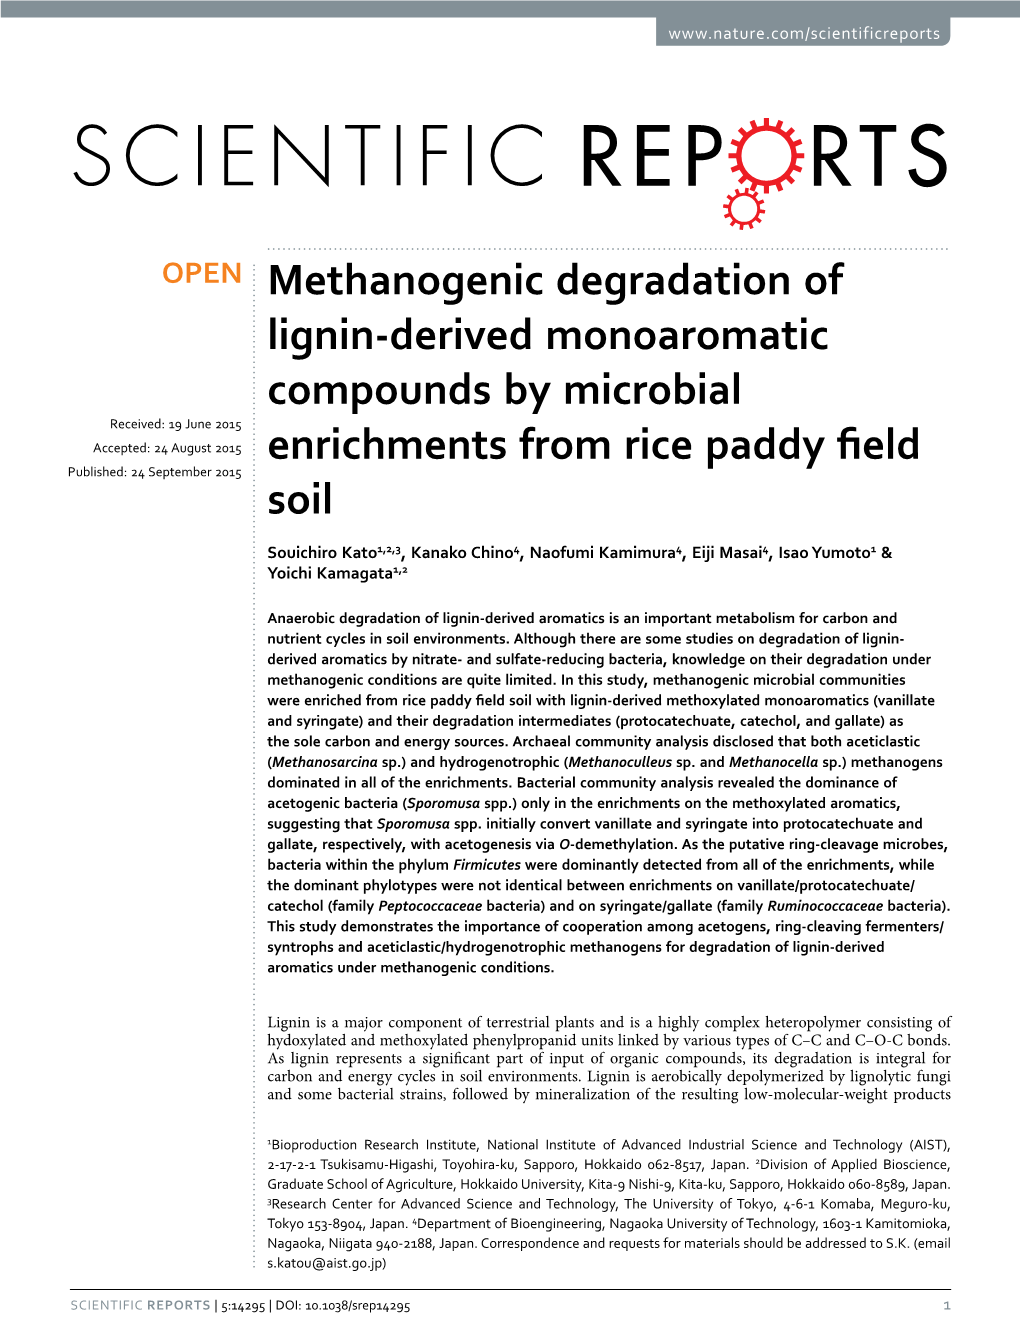 Methanogenic Degradation of Lignin-Derived Monoaromatic Compounds by Microbial Enrichments from Rice Paddy Field Soil